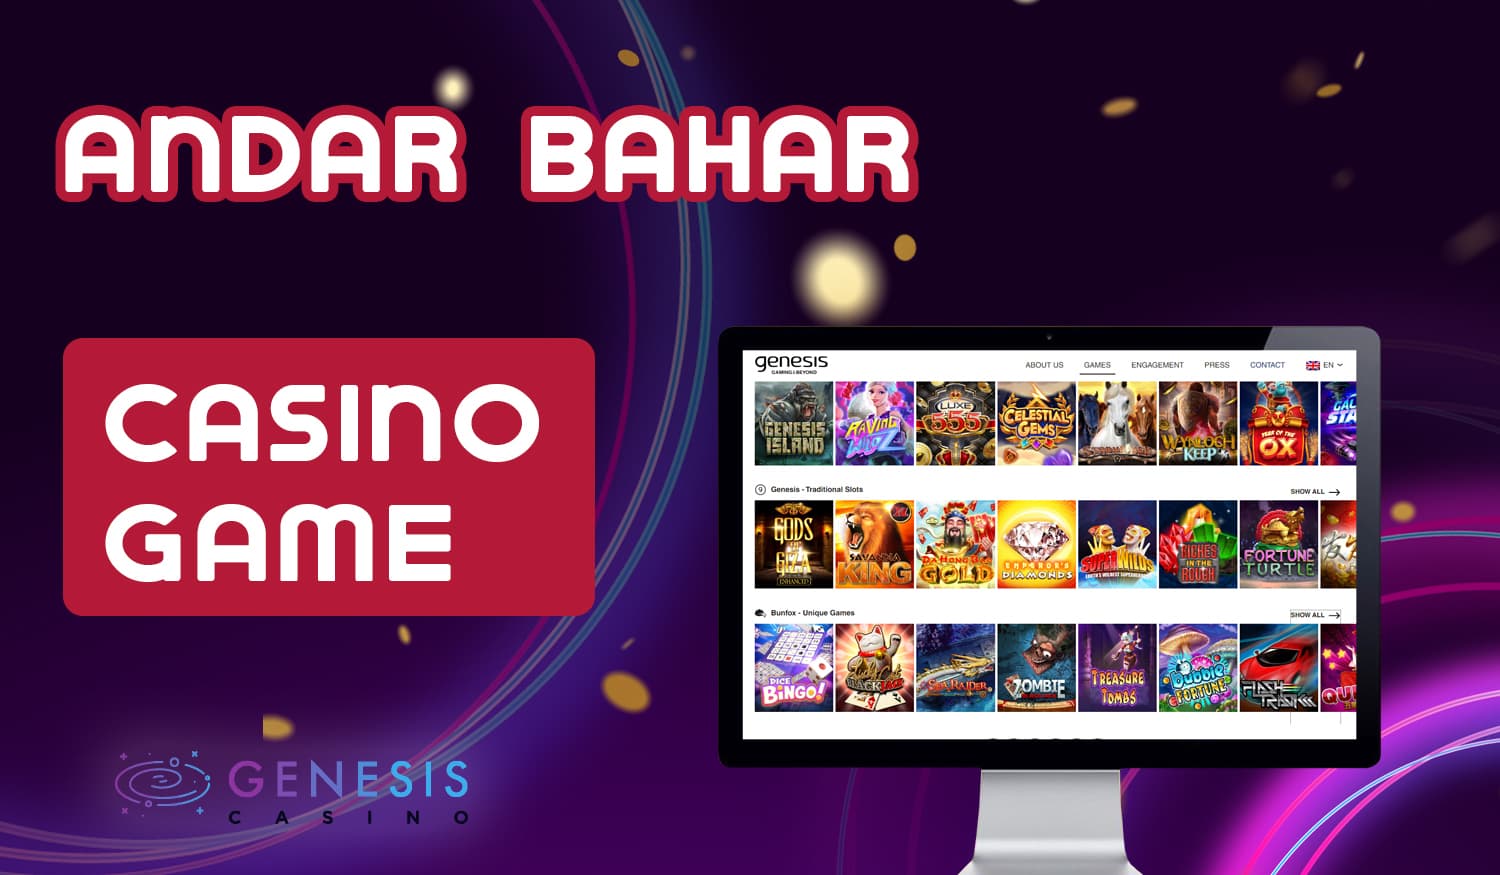 Casino games that Genesis online casino offers to users from India